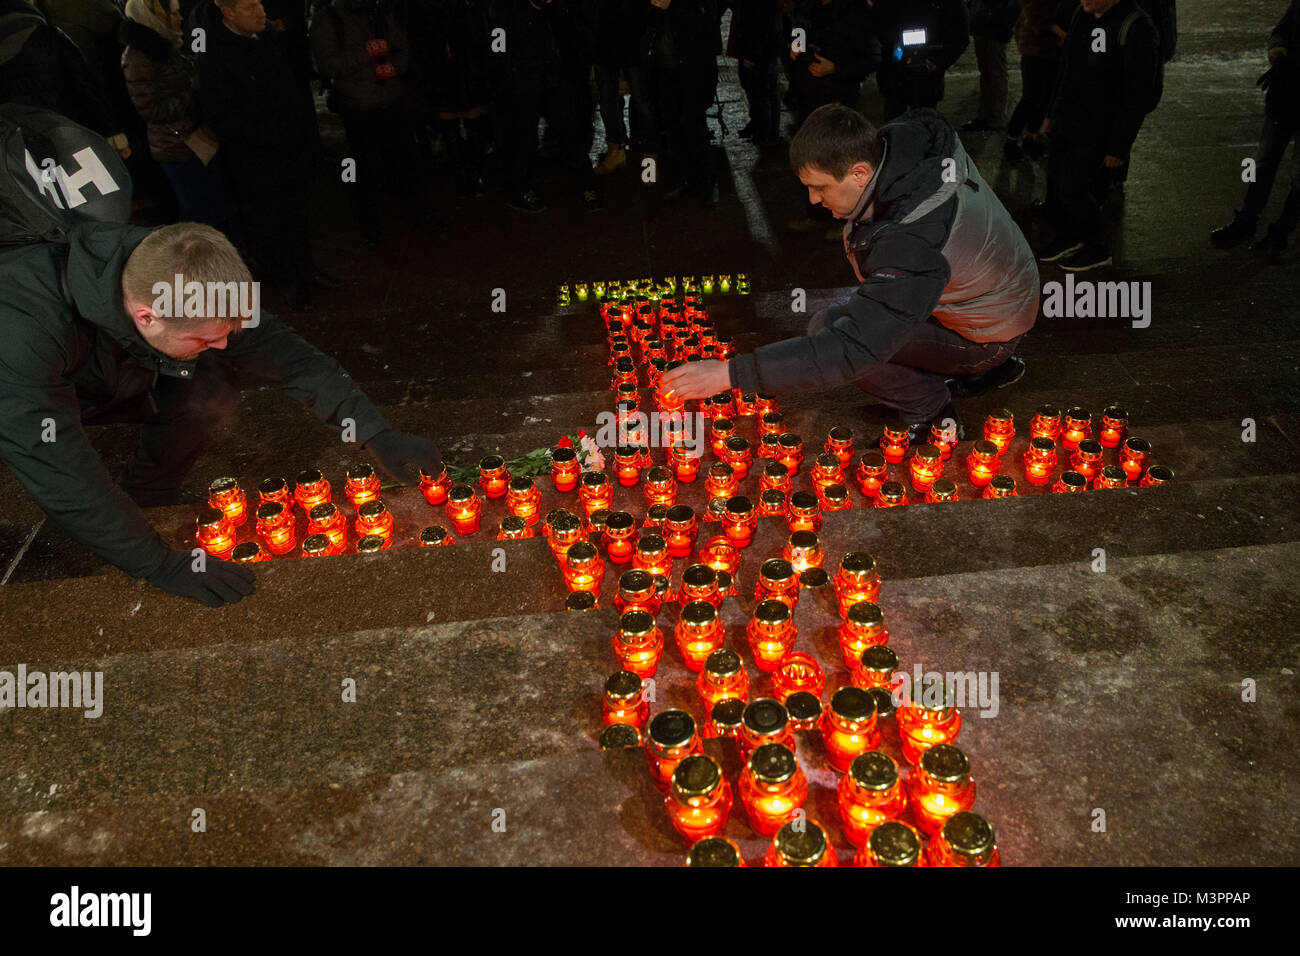 Moscow, Russia. 12th February, 2018. People place candles to mourn the victims in the AN-148 passenger jet crash near the Cathedral of Christ the Saviour in Moscow, Russia, on Feb. 12, 2018. Rescuers have presumably recovered the second flight data recorder of the AN-148 passenger jet that crashed in the Moscow region on Sunday, the Russian Emergencies Ministry said Monday. Credit: Xinhua/Alamy Live News Stock Photo